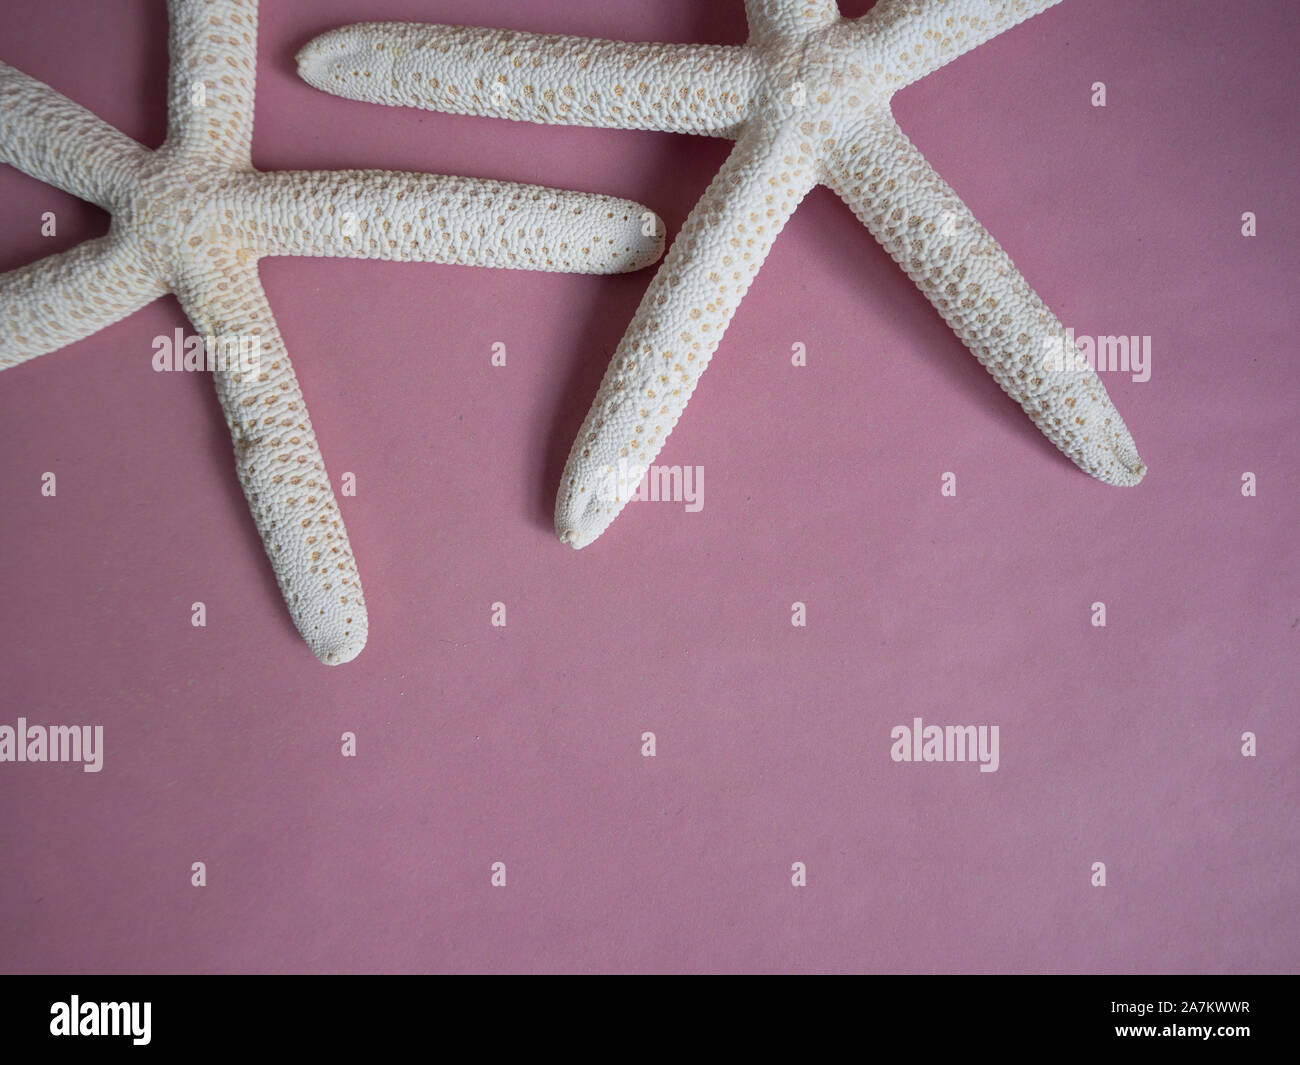 Dried sea stars on pink background Stock Photo